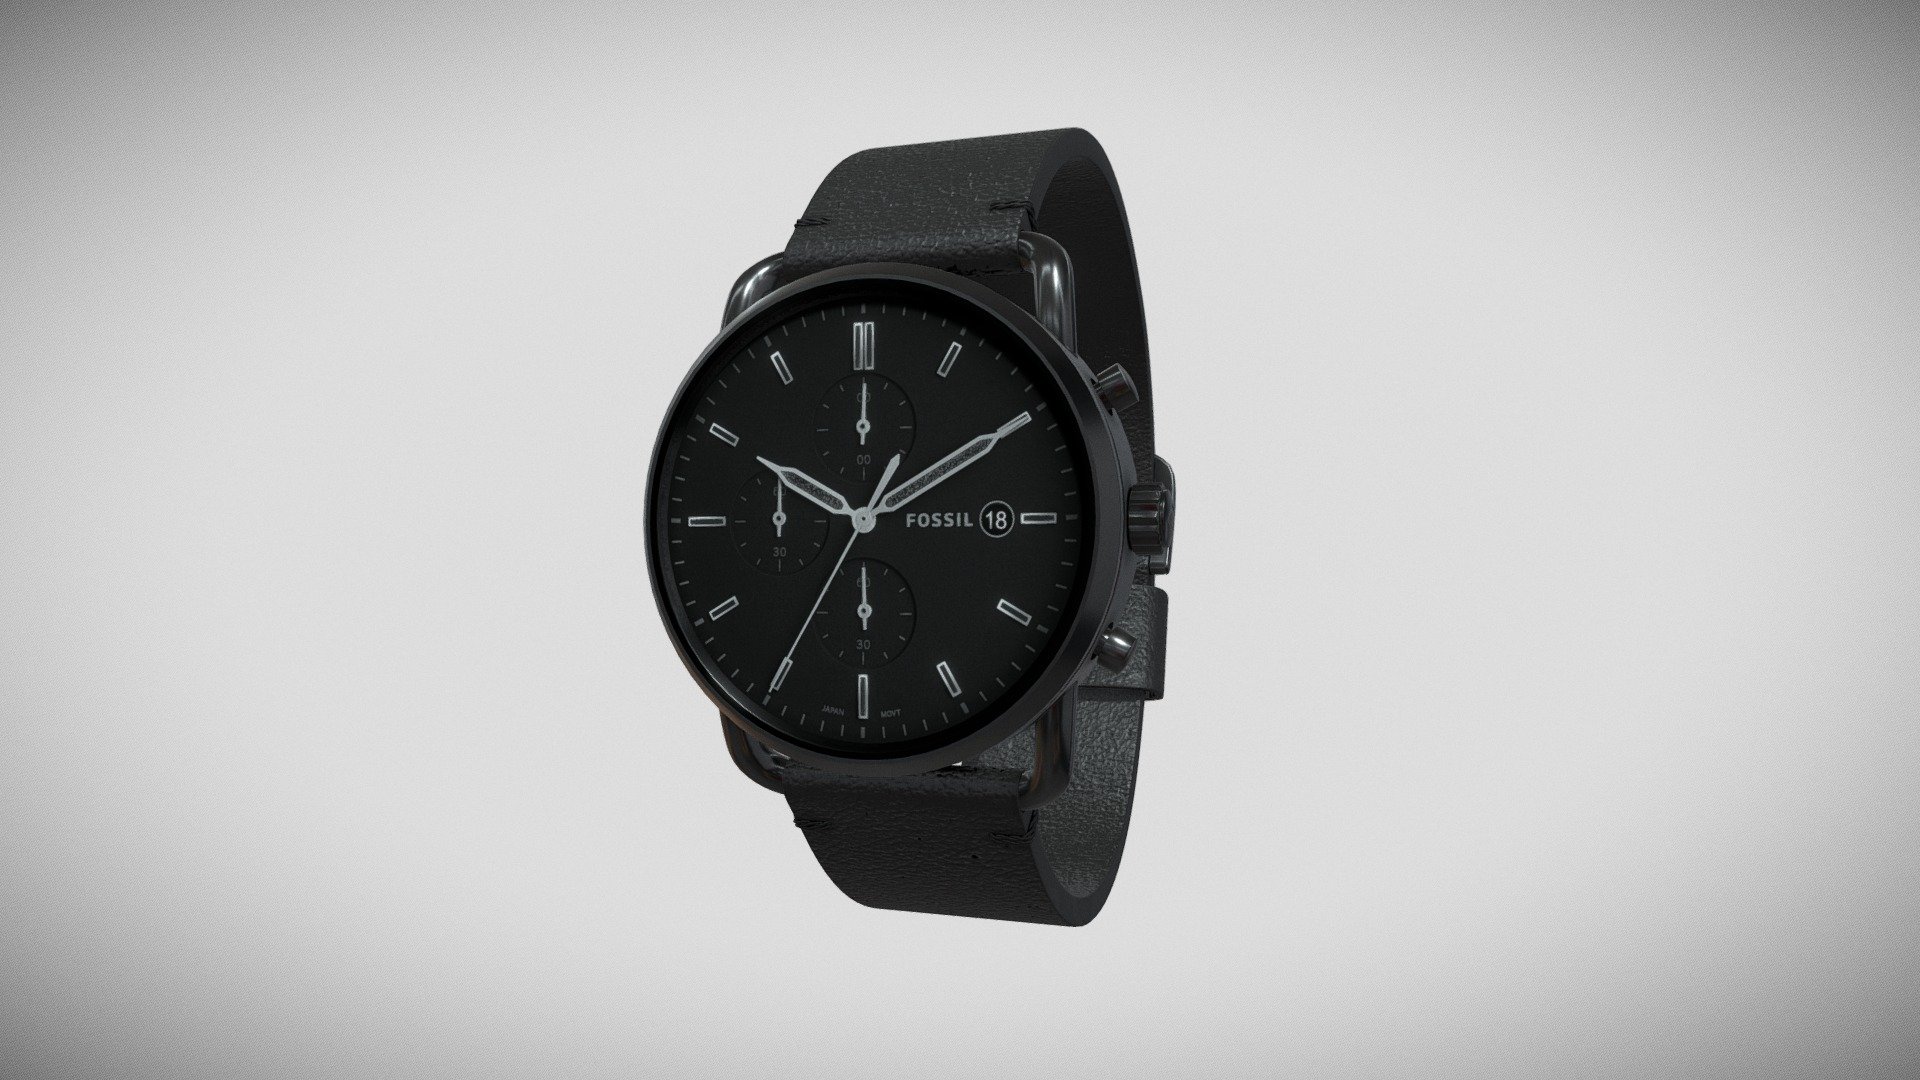 Fossil Men's Chronograph Commuter Black Leather Strap Watch 42mm
This is a lowpoly Watch 3D model, Ready to be used in your AR/VR or any metaverse projects 3d model